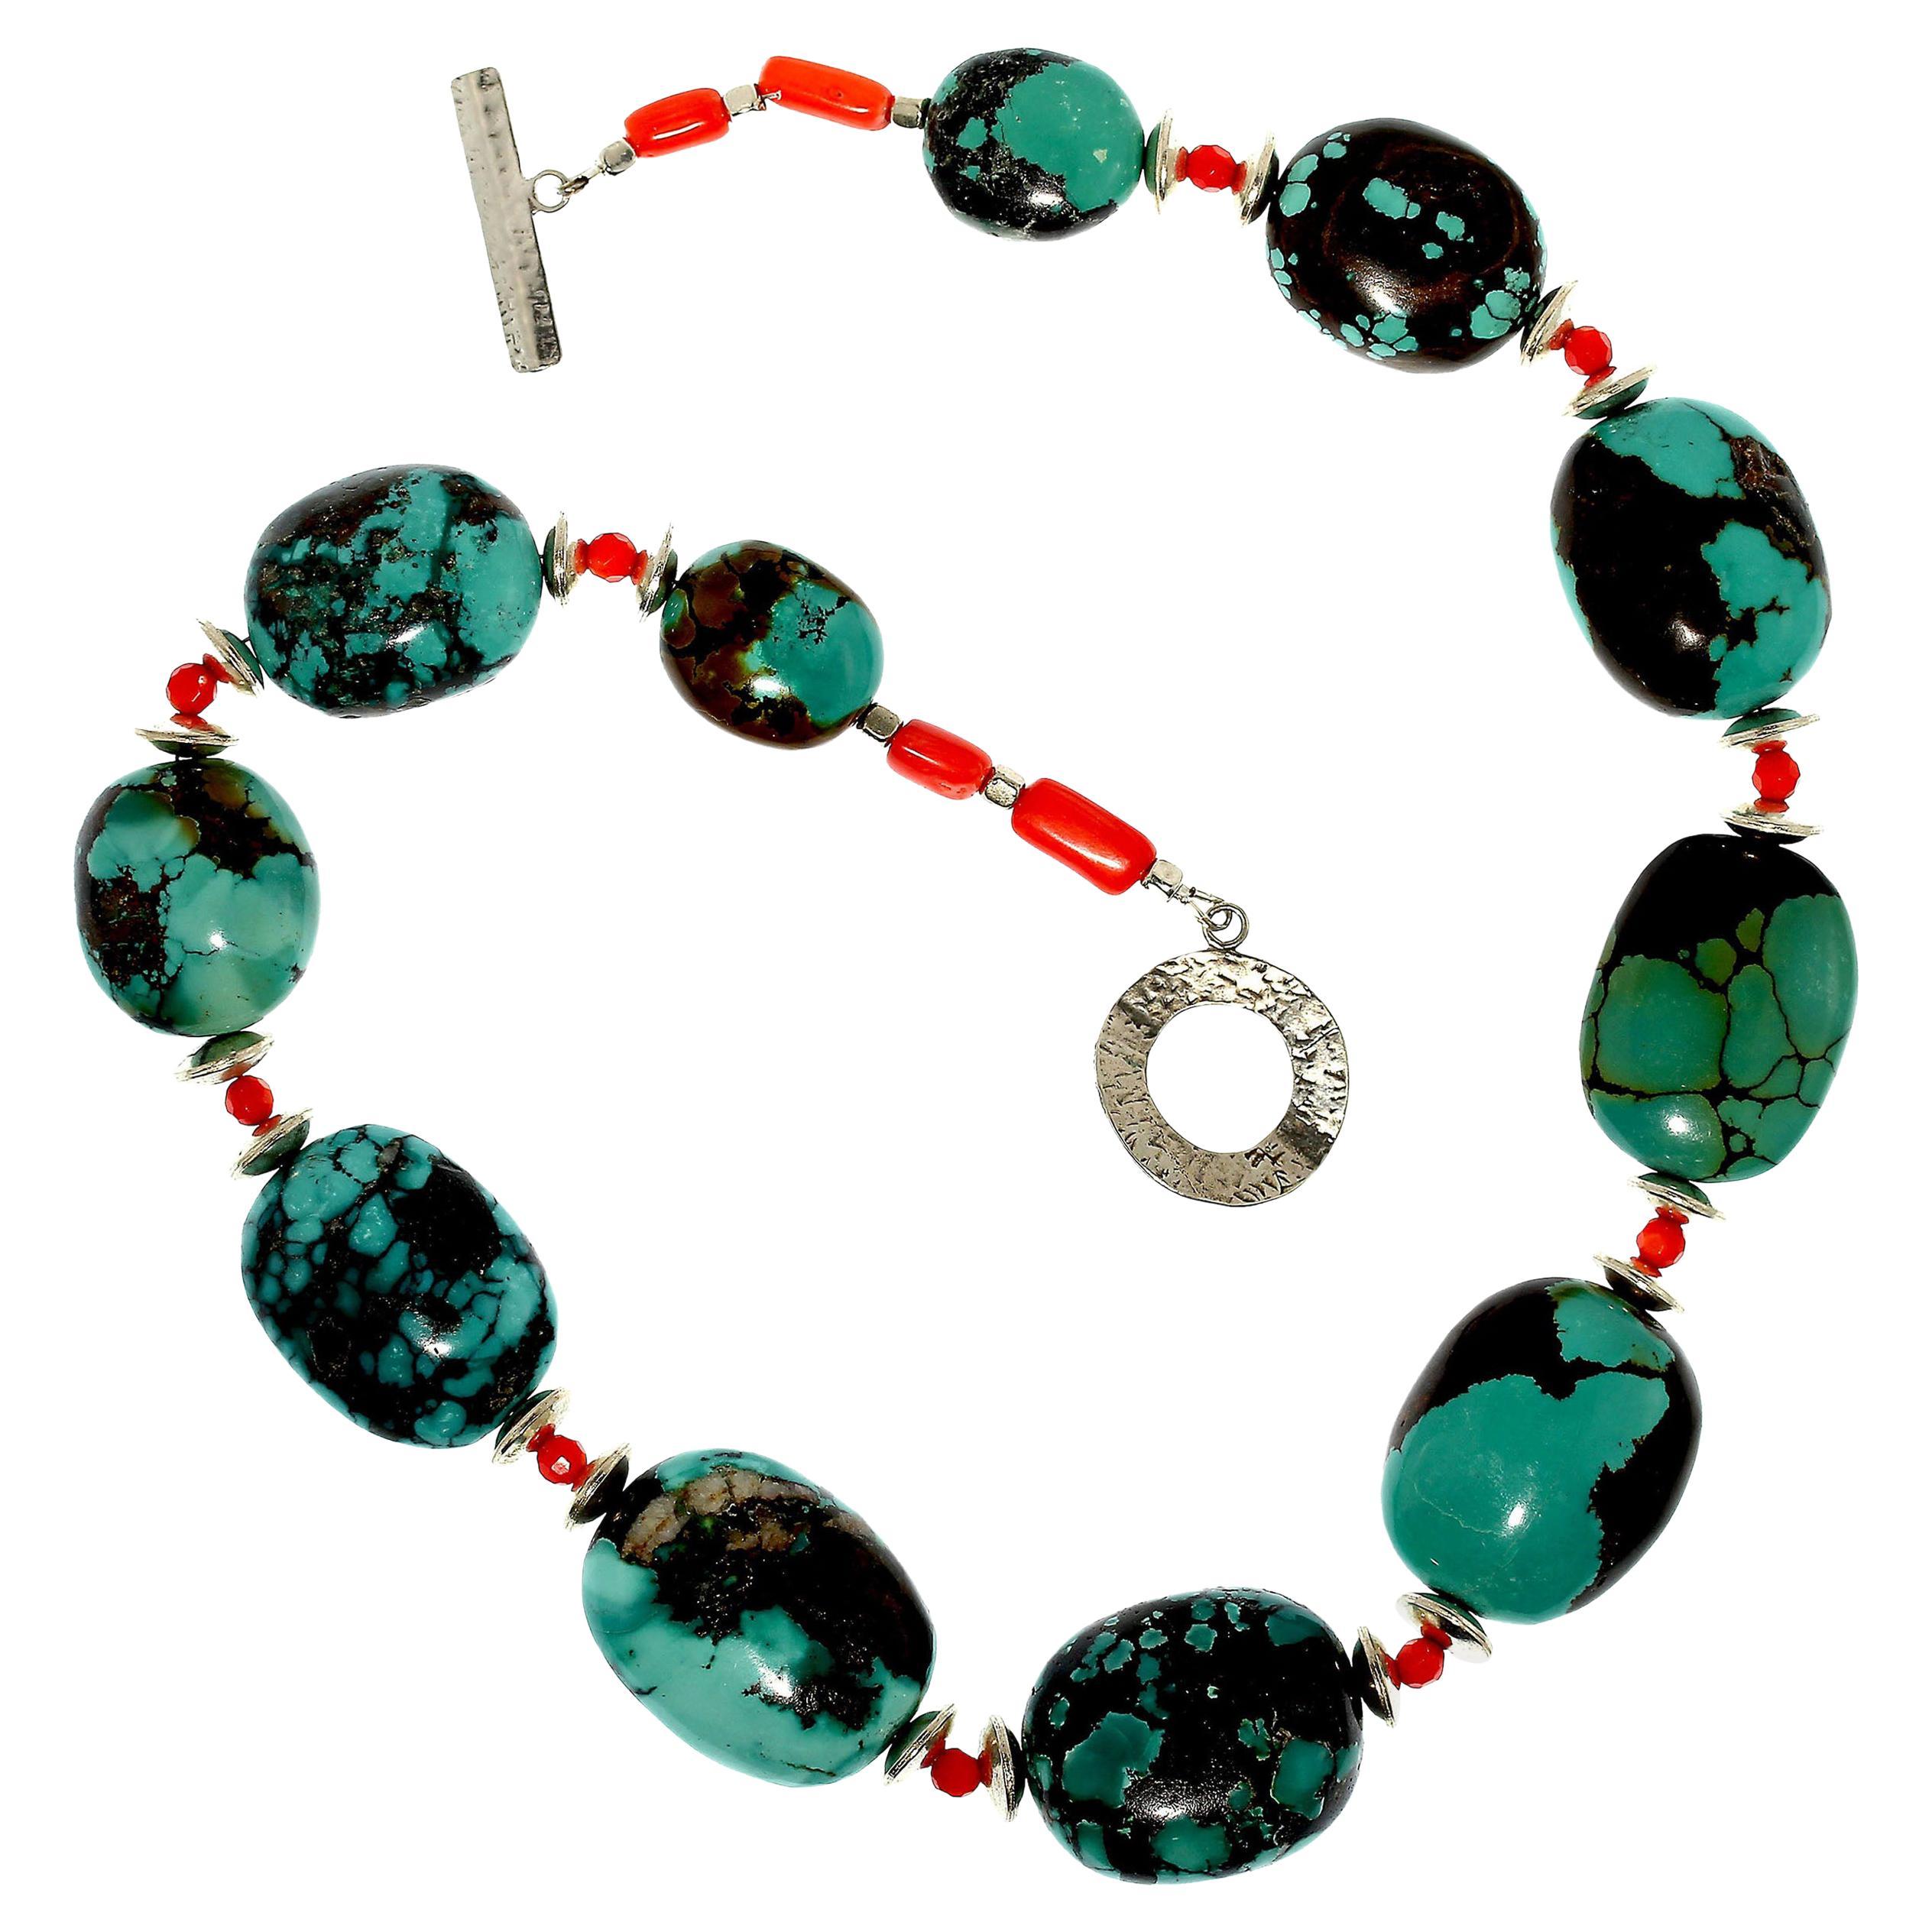 21 Inch Hubei turquoise nugget necklace featuring orange and silver accents.  This unique necklace begs to enhance your wardrobe. The touch of Southwest flair will go far to spice up the atmosphere wherever you find yourself.  There are eleven